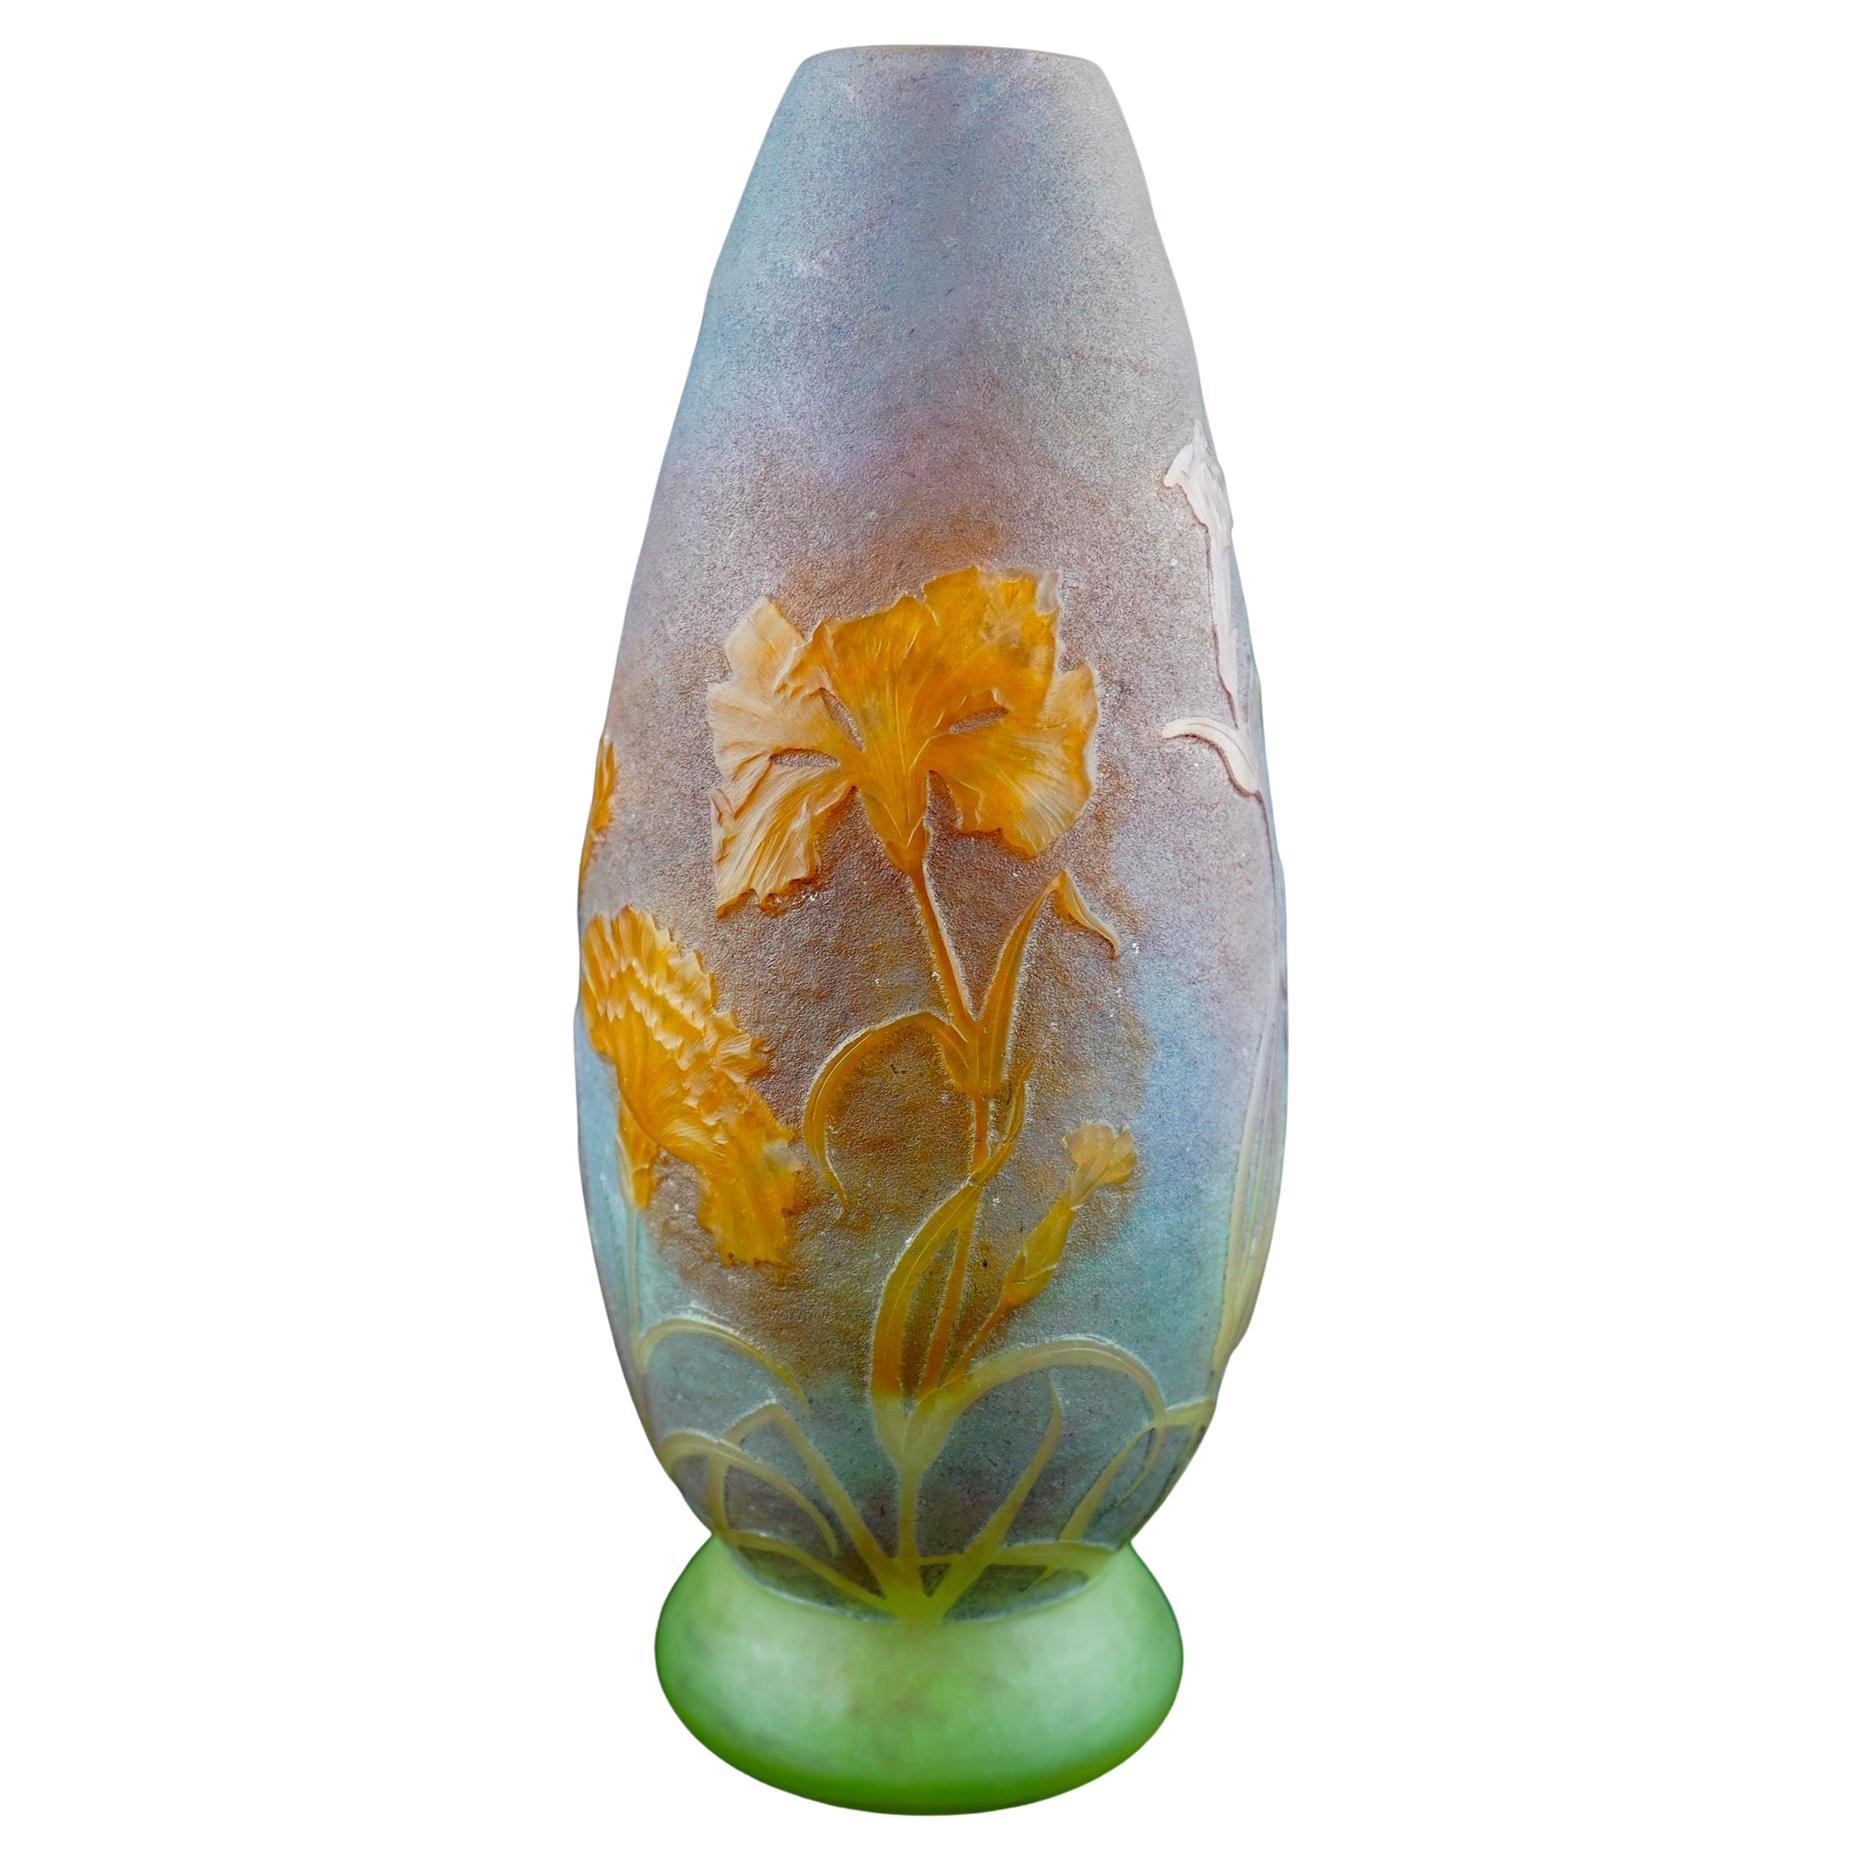 Daum Wheel Carved and Vitrified Glass Carnations Vase